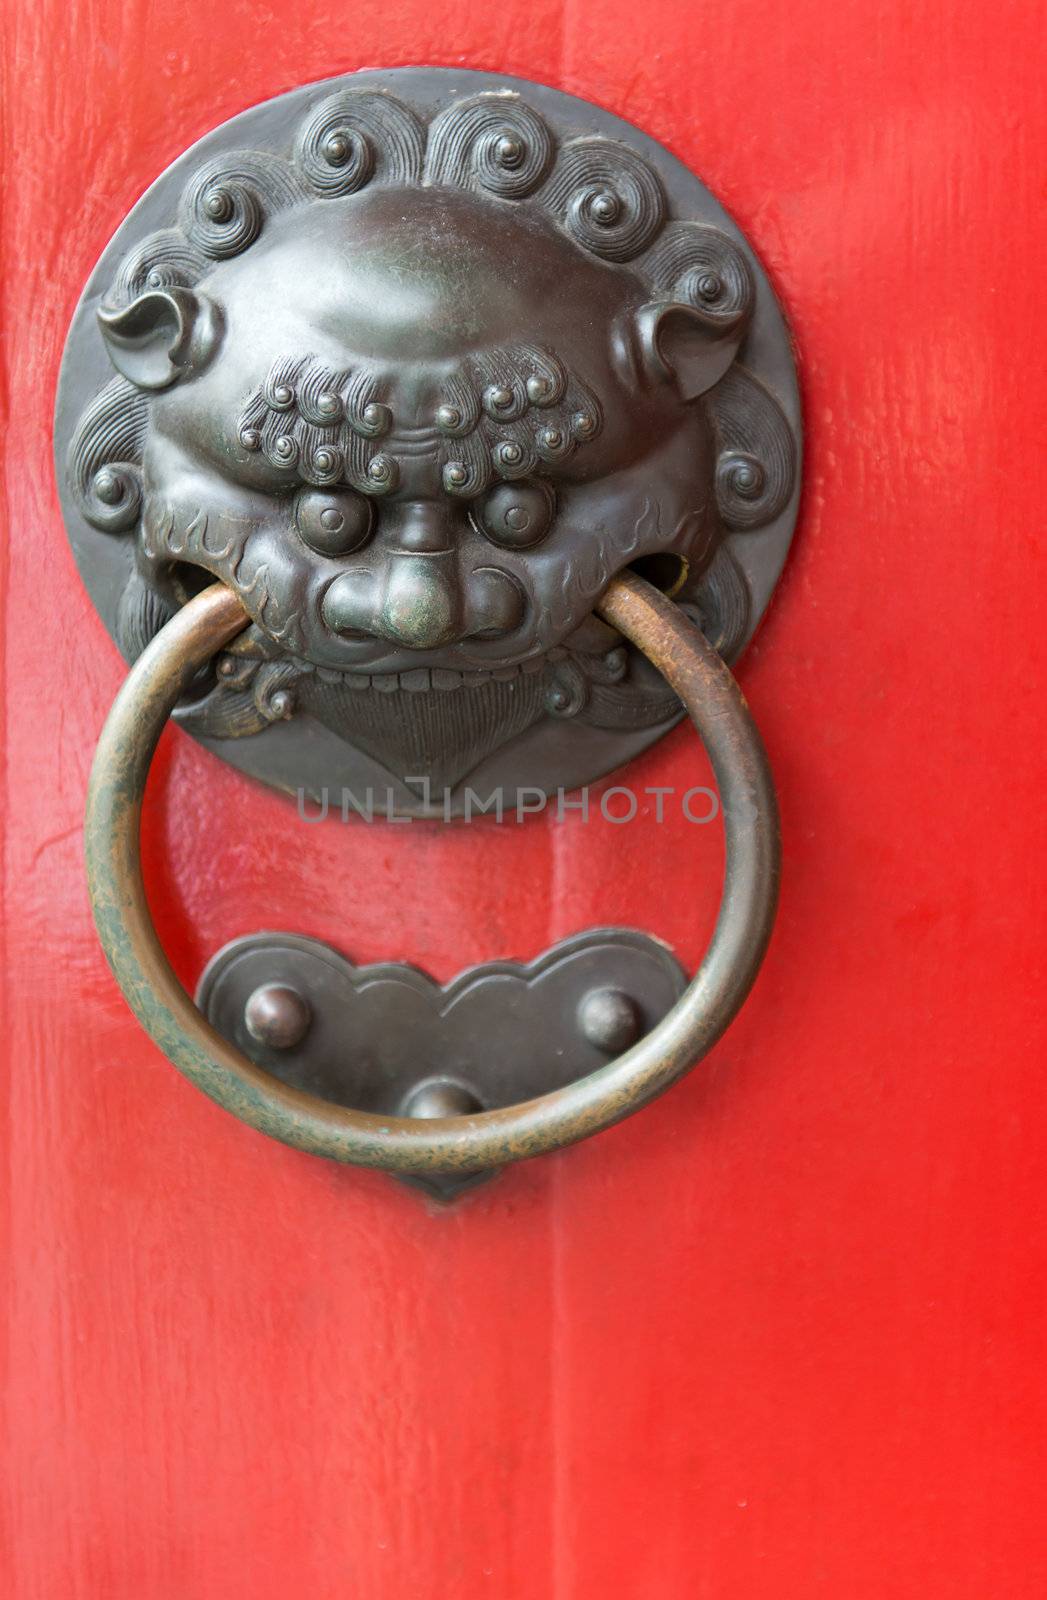 Old red chinese door with decorative metal handle, selective focus on the face front